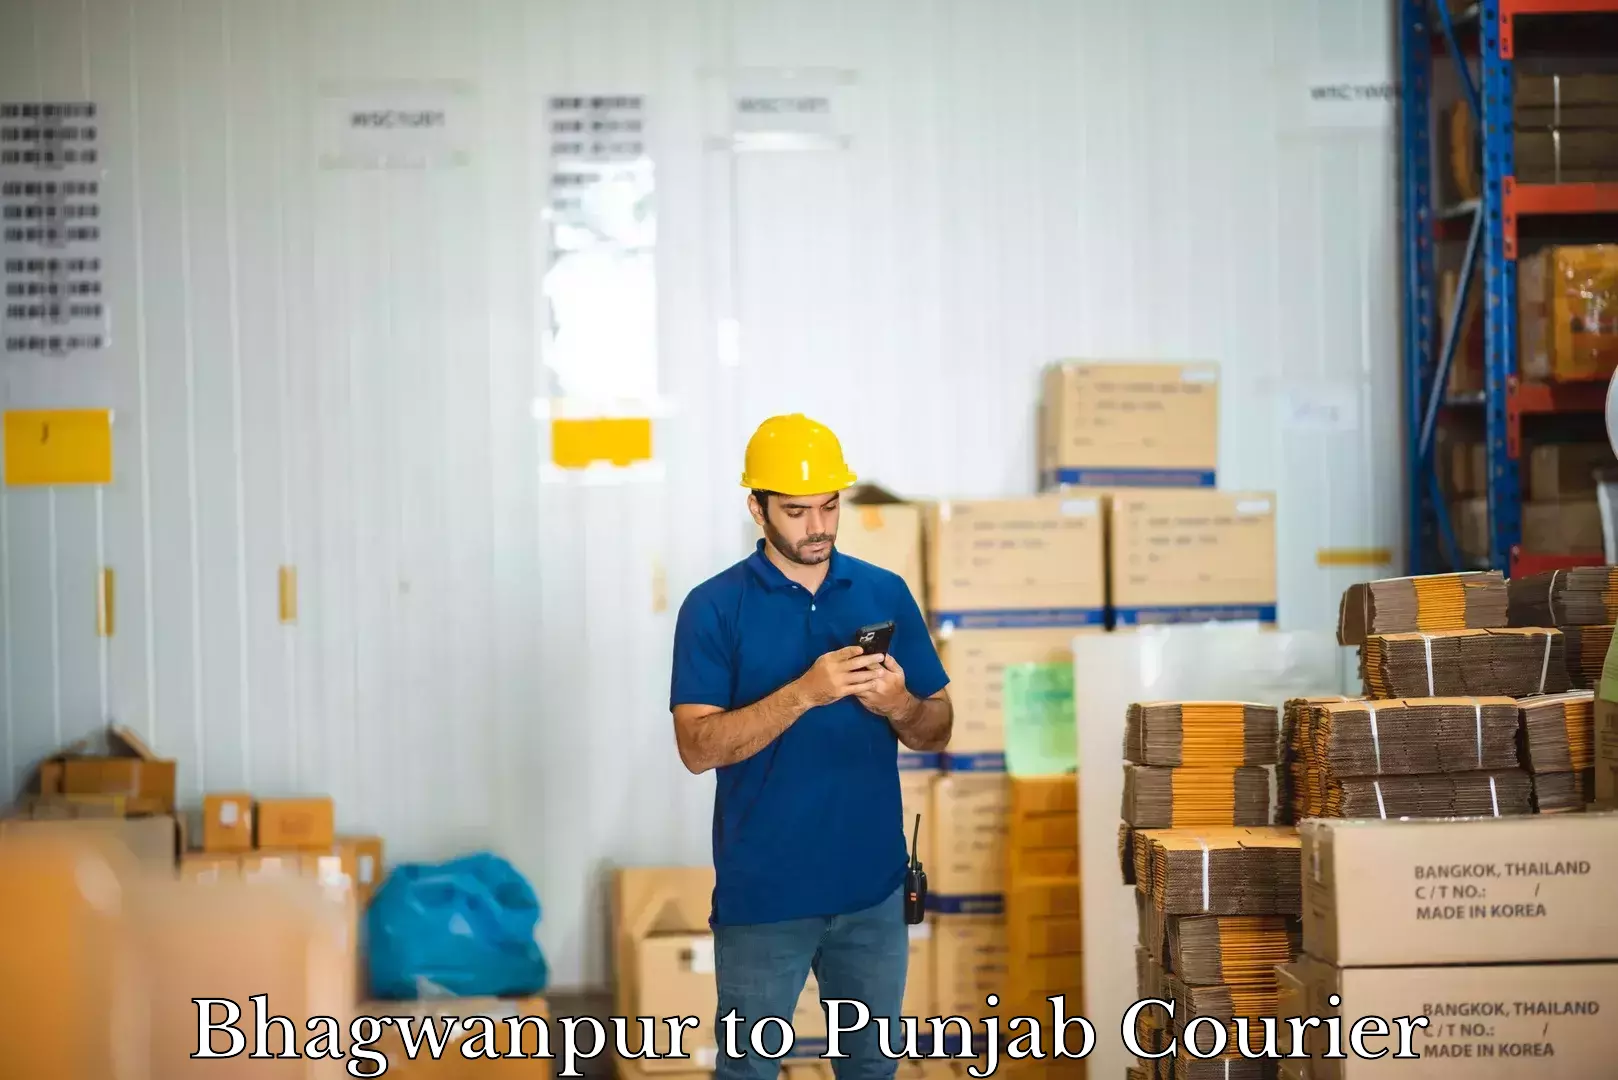 Luggage shipment processing in Bhagwanpur to Mohali